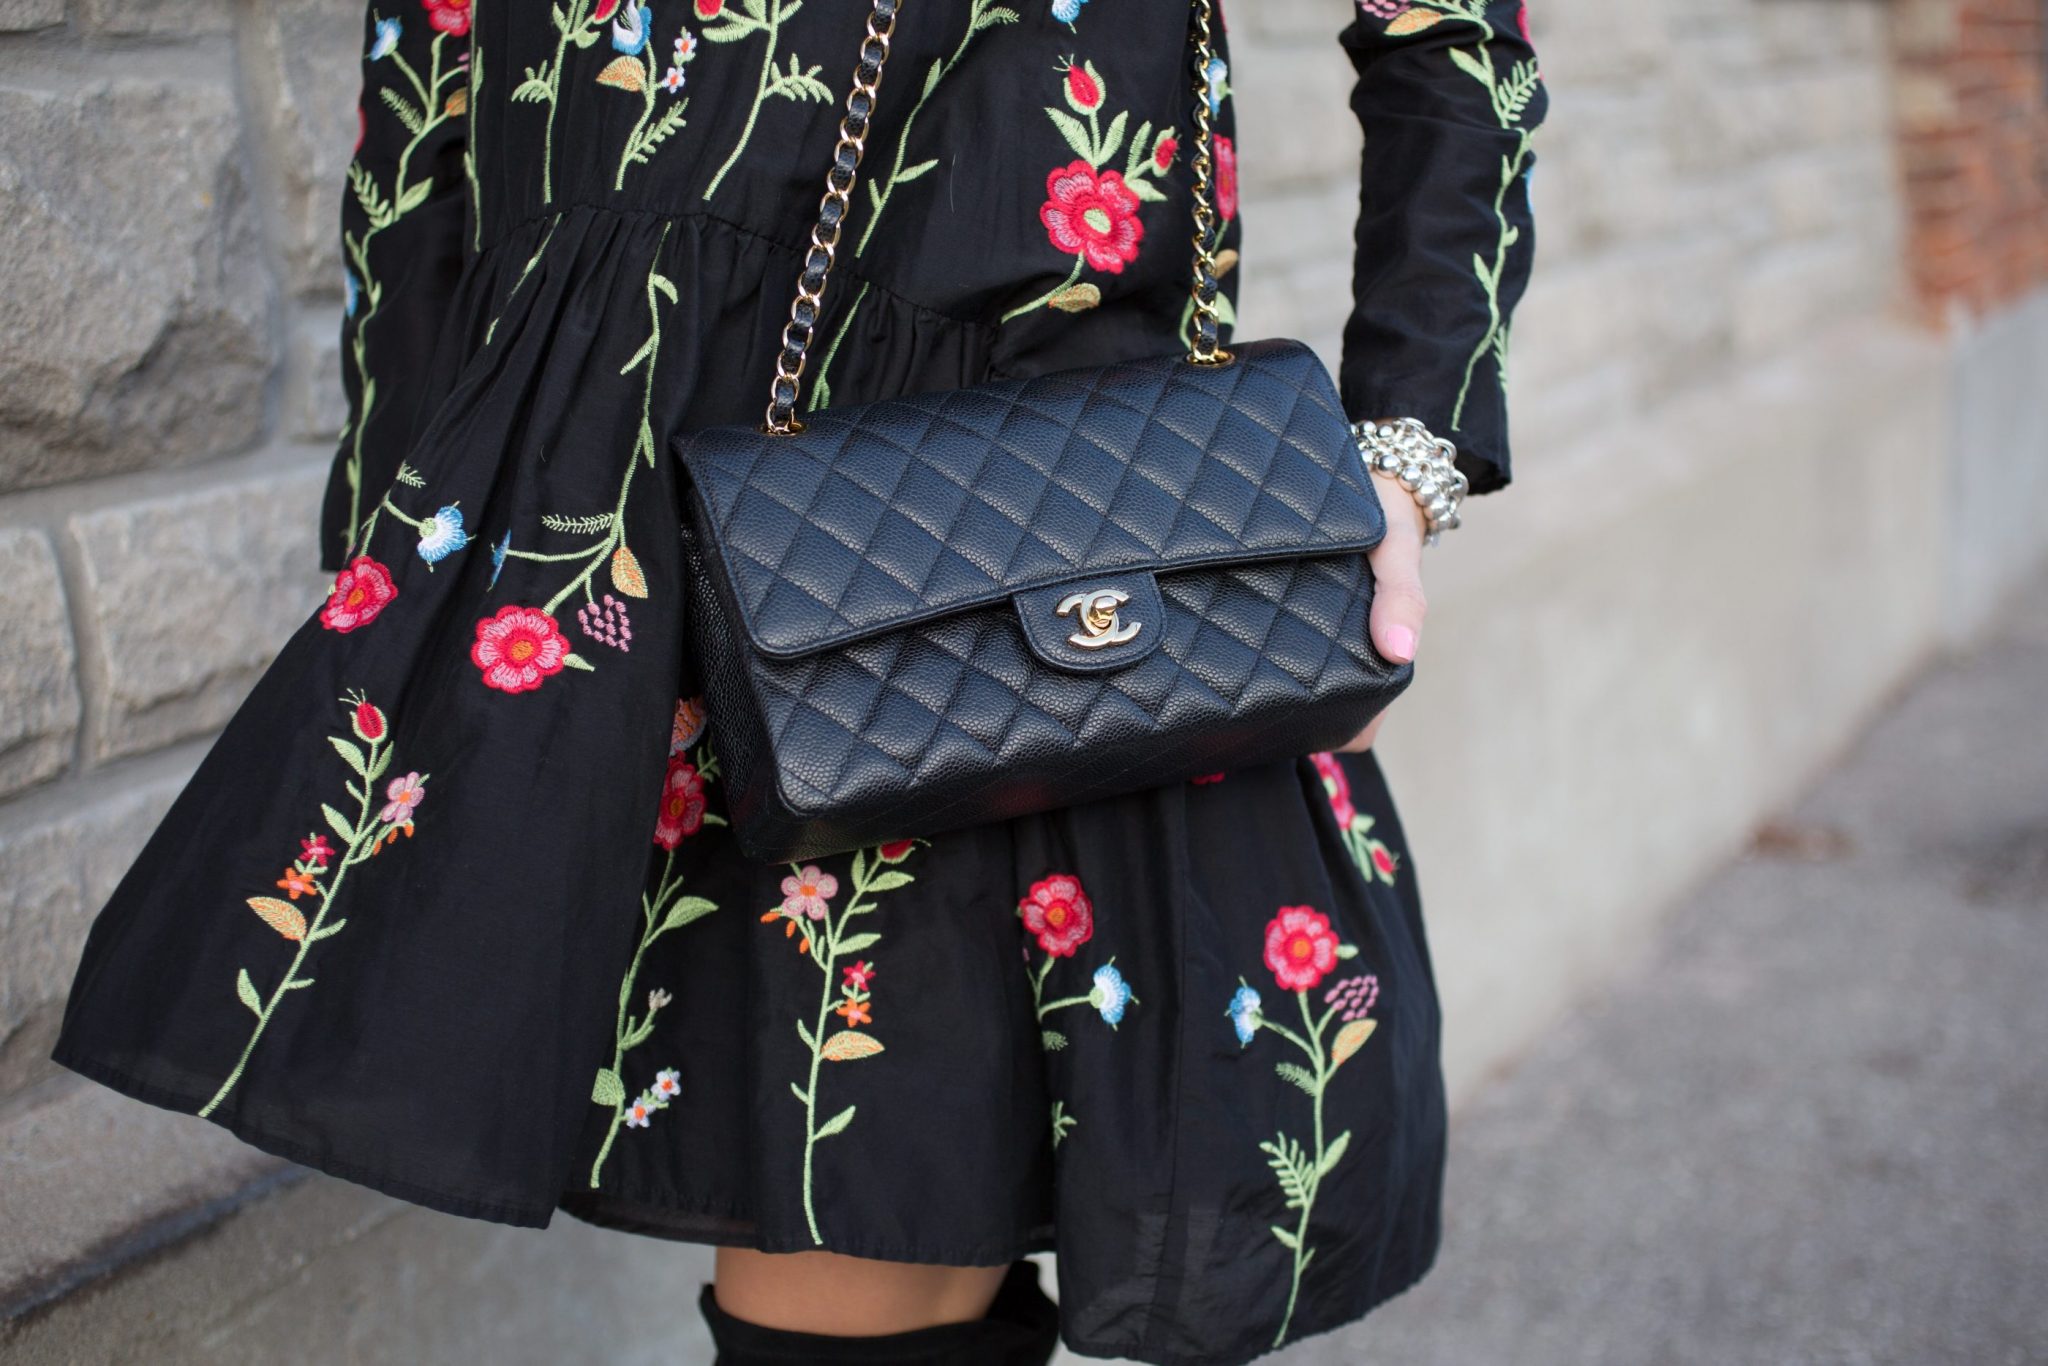 Chanel Bag with Zara Floral Embroidery Dress sparkleshinylove